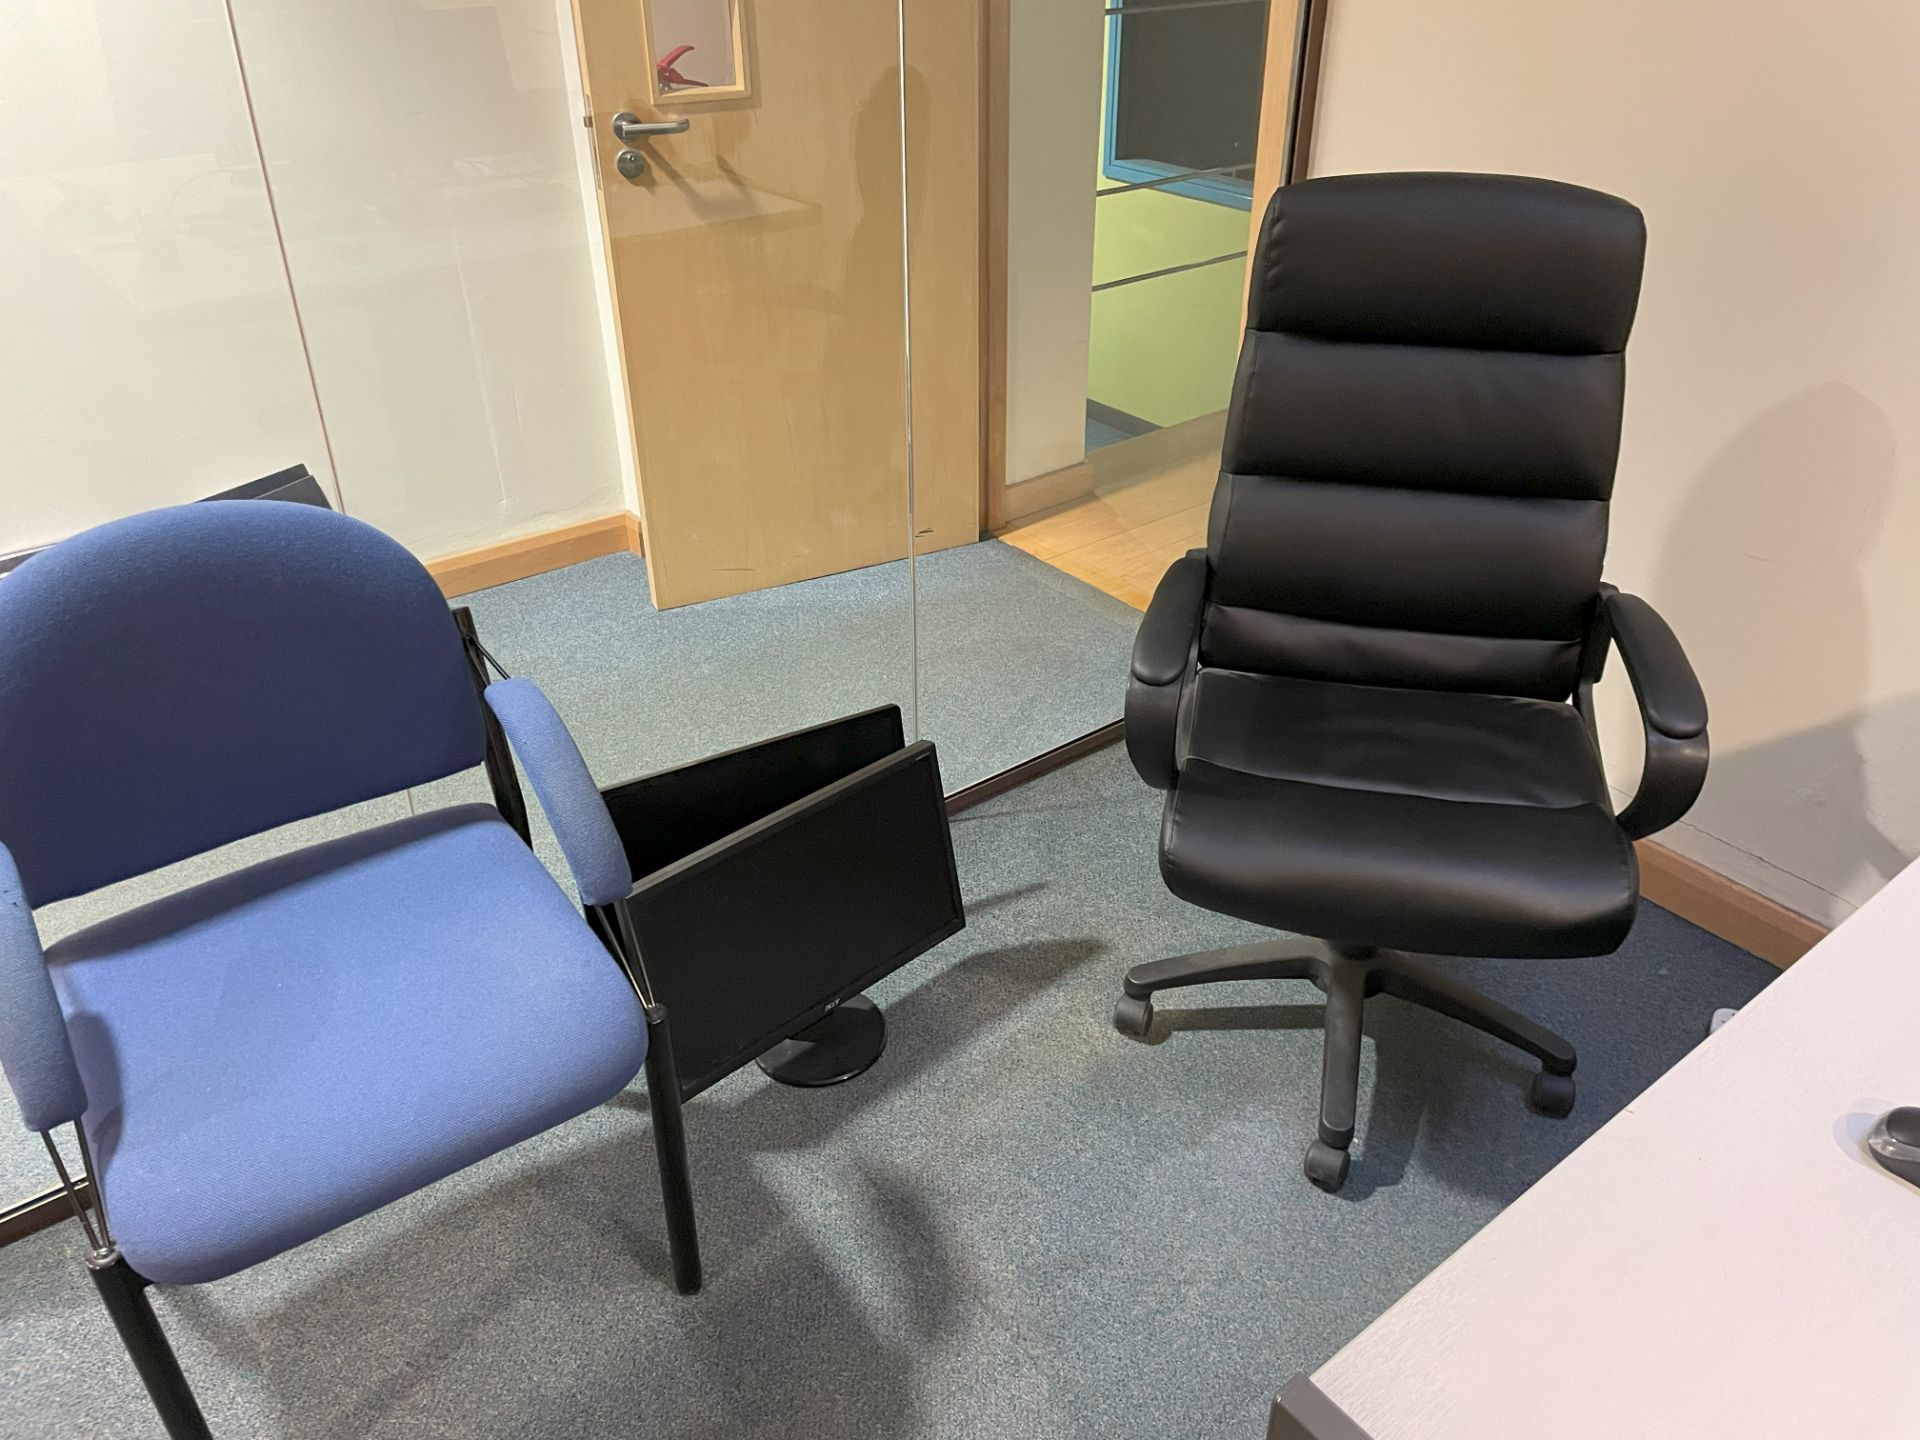 Reception Office Furniture (without contents) - Image 6 of 6